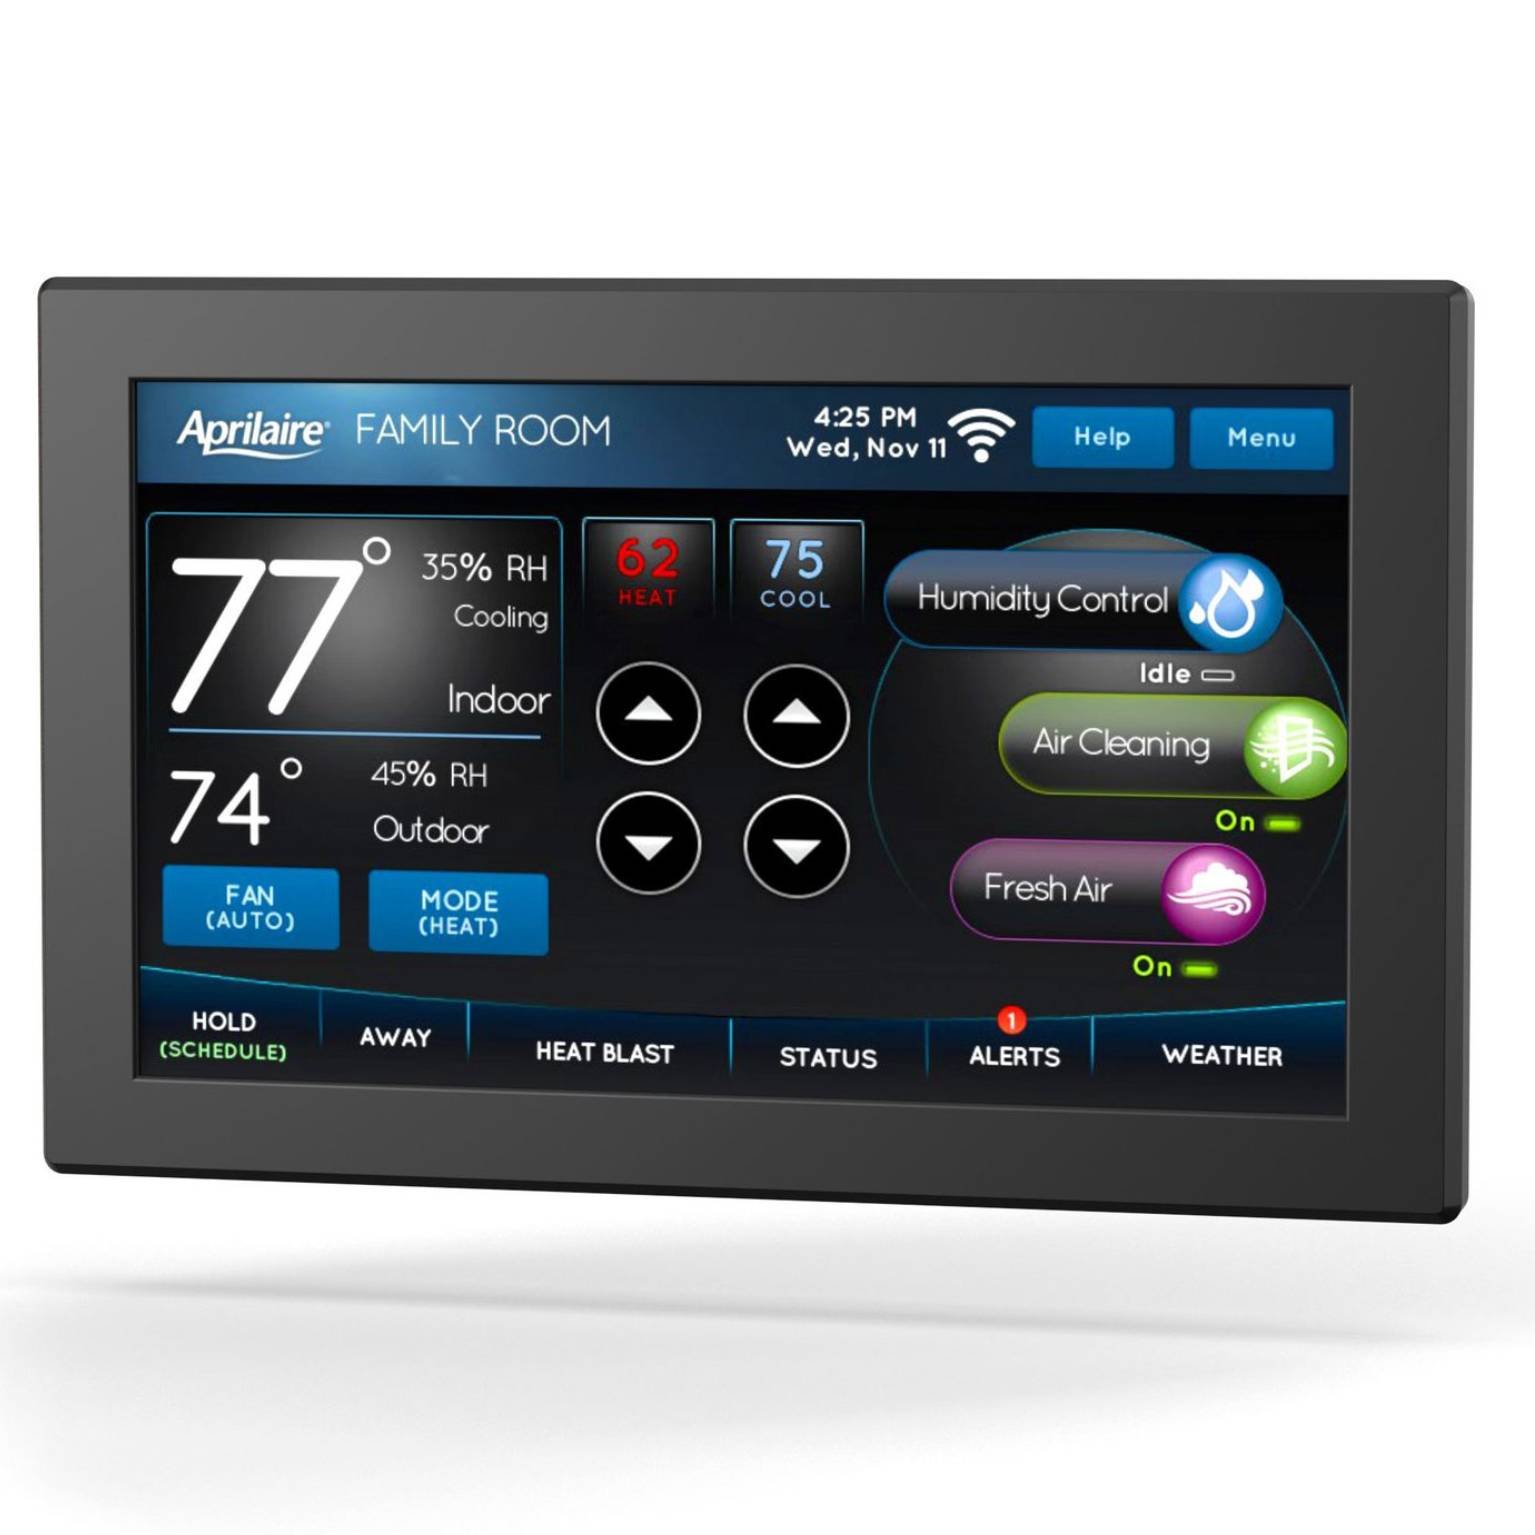 AprilAire 8840 Automation Thermostat with WIFI Capability